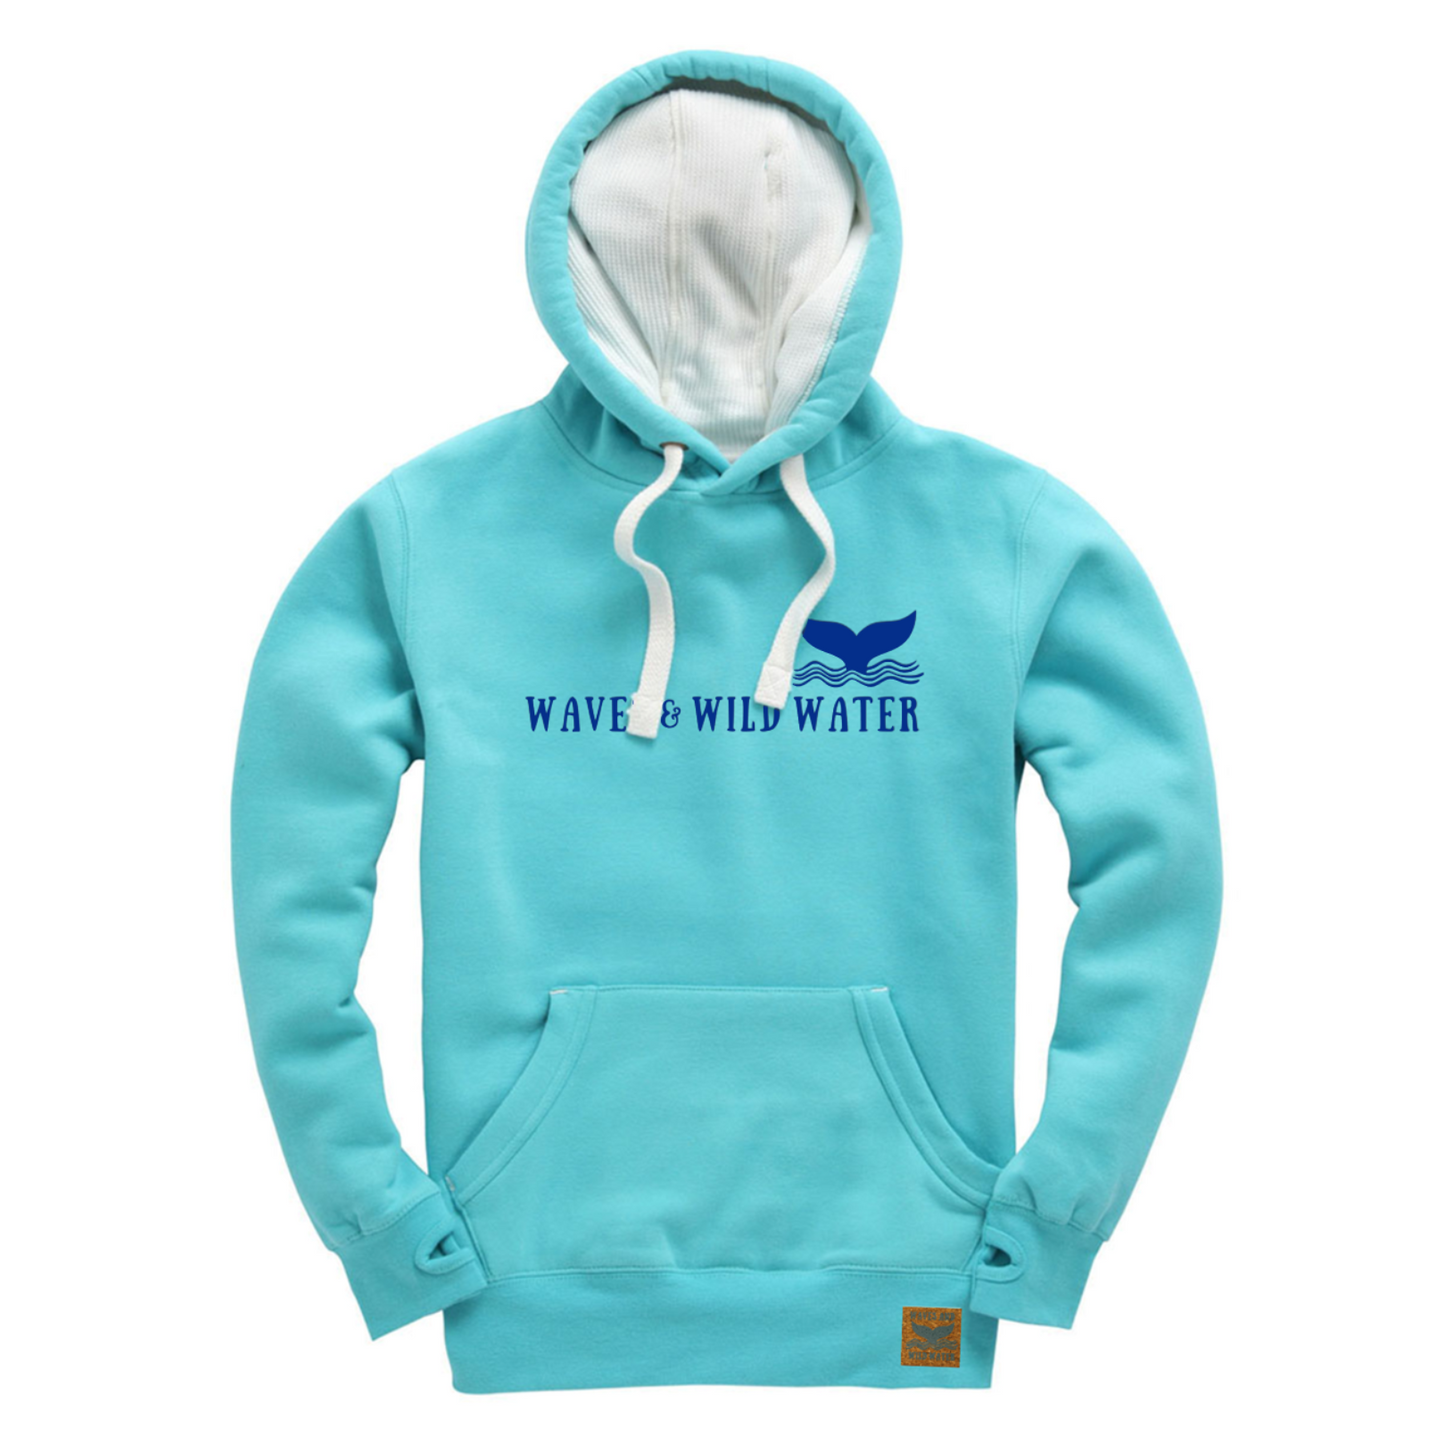 The front of a lagoon blue hoodie with the Waves & Wild logo printed across the front in blue ink.